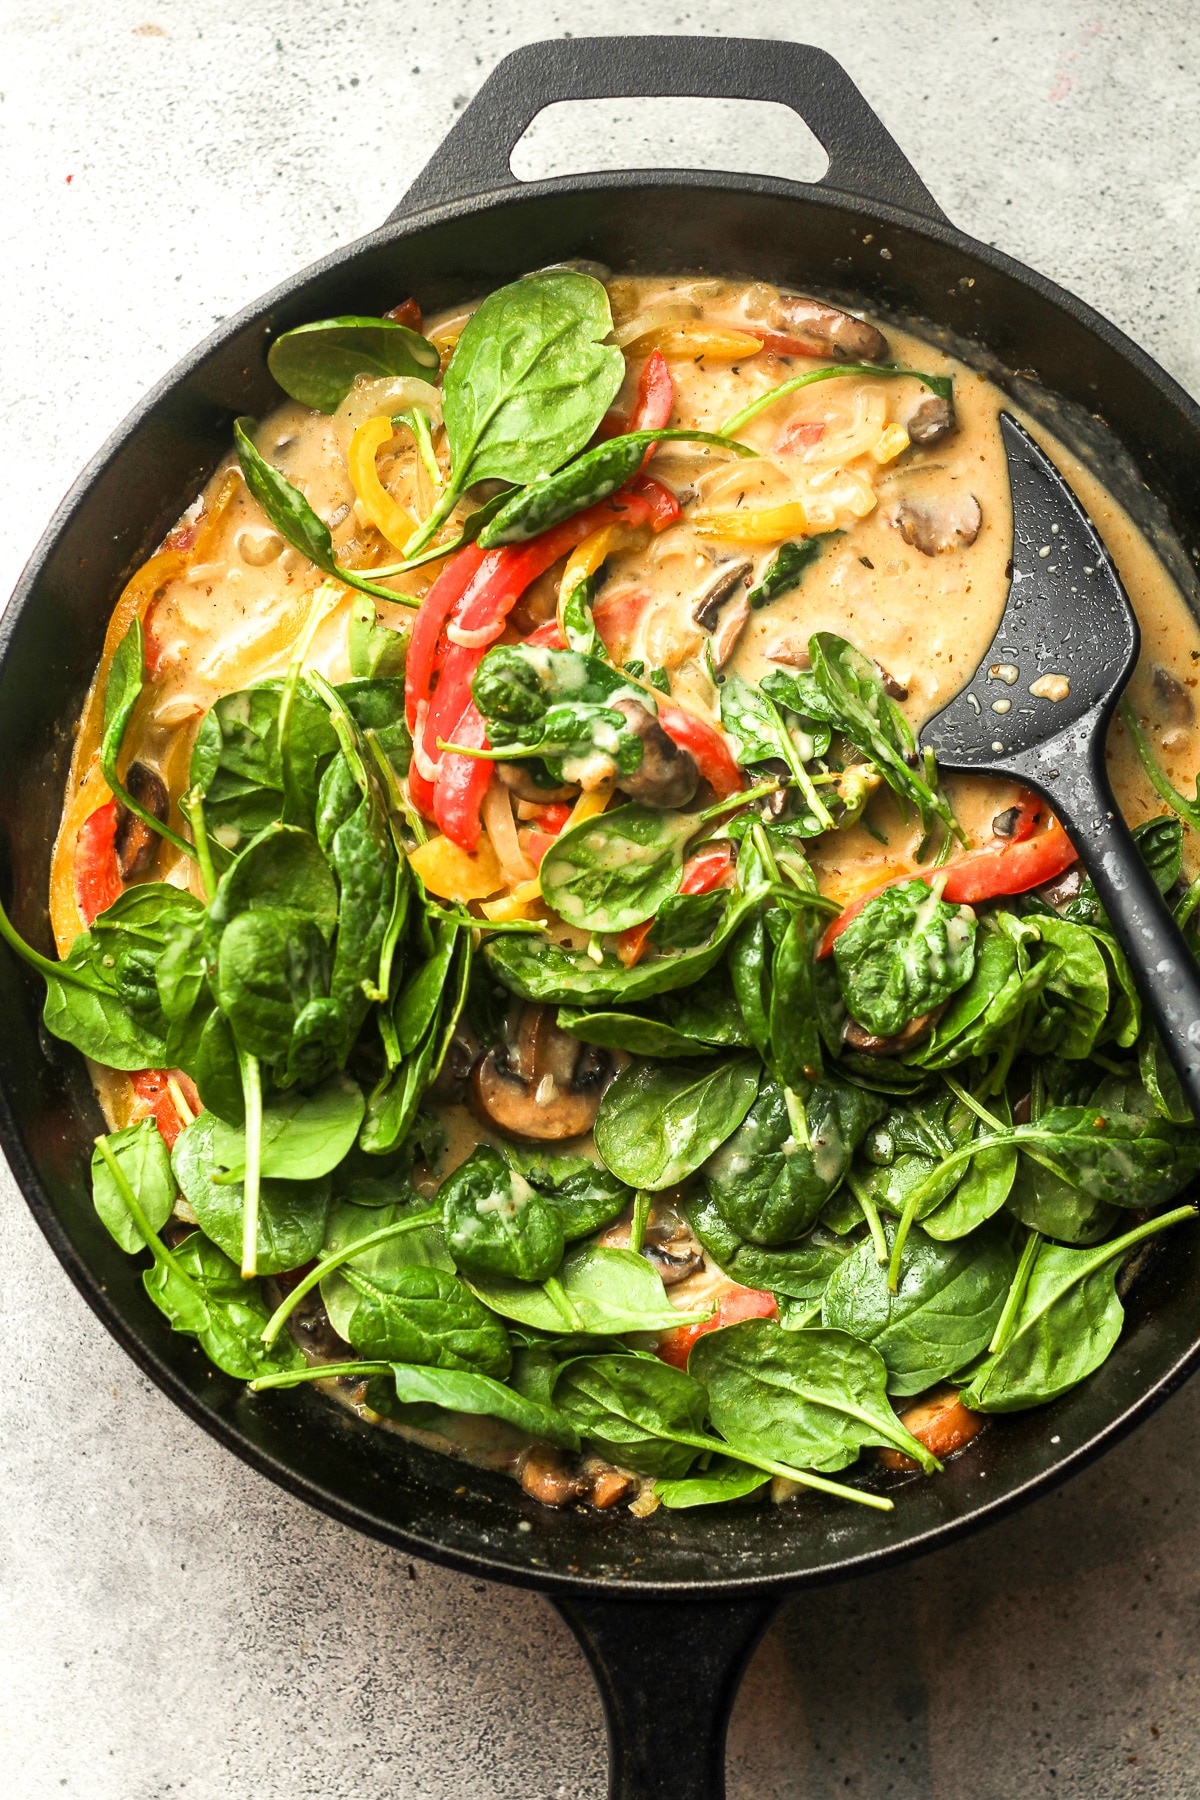 A skillet of the sauce after adding baby spinach.